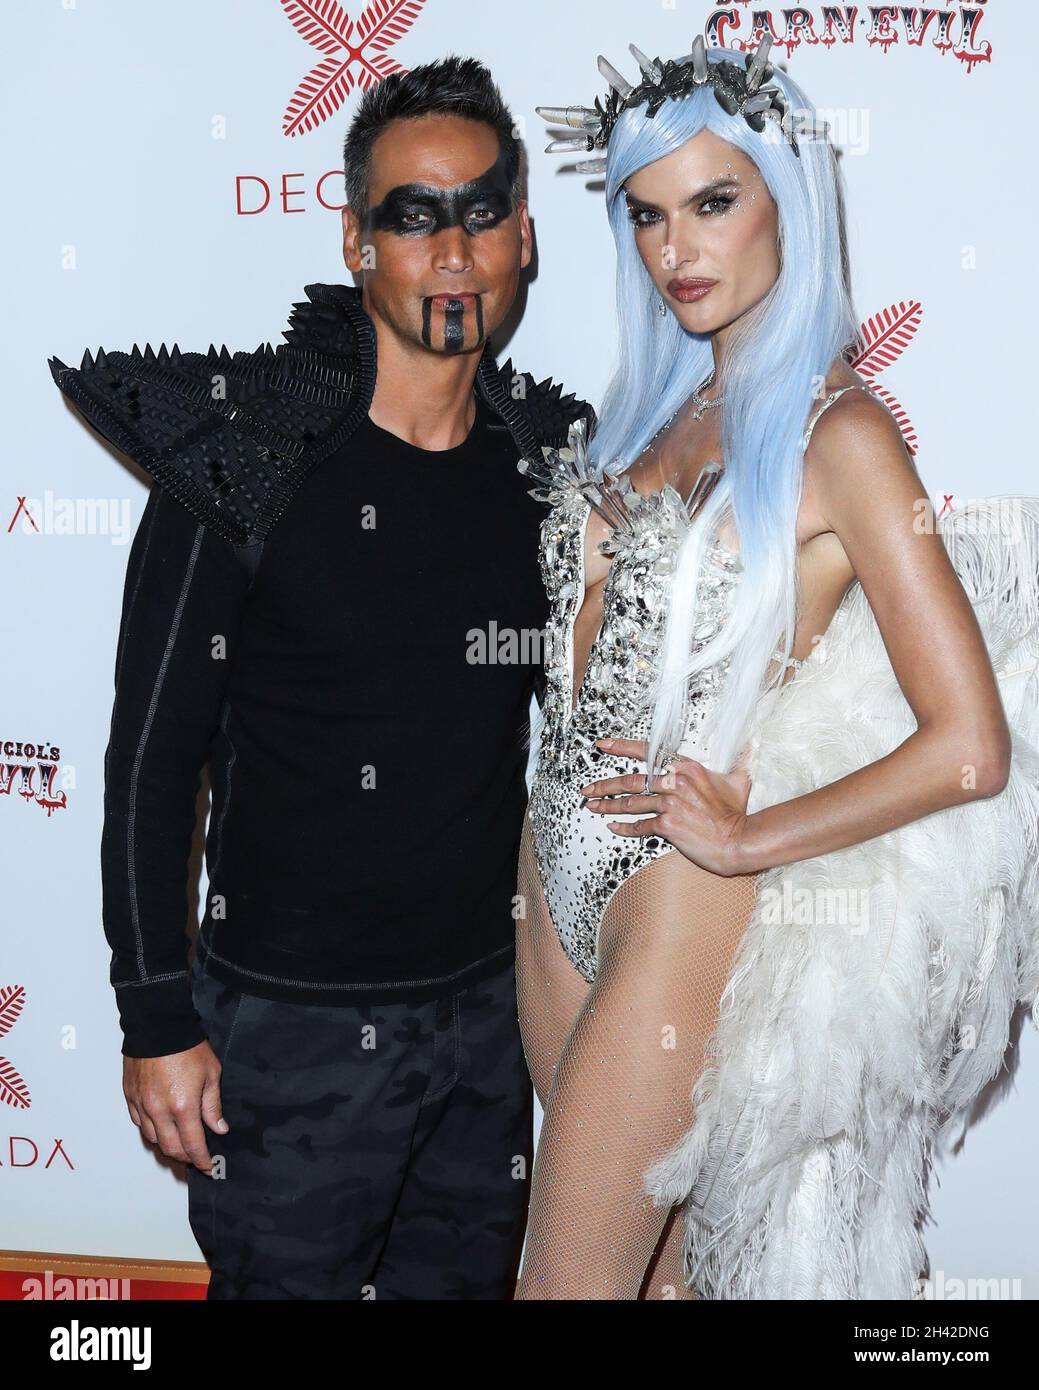 BEL AIR, LOS ANGELES, CALIFORNIA, USA - OCTOBER 30: Richard Lee and  girlfriend/model Alessandra Ambrosio arrive at Darren Dzienciol's CARN*EVIL  Halloween Party Presented by Decada and Hosted by Alessandra Ambrosio with  Live